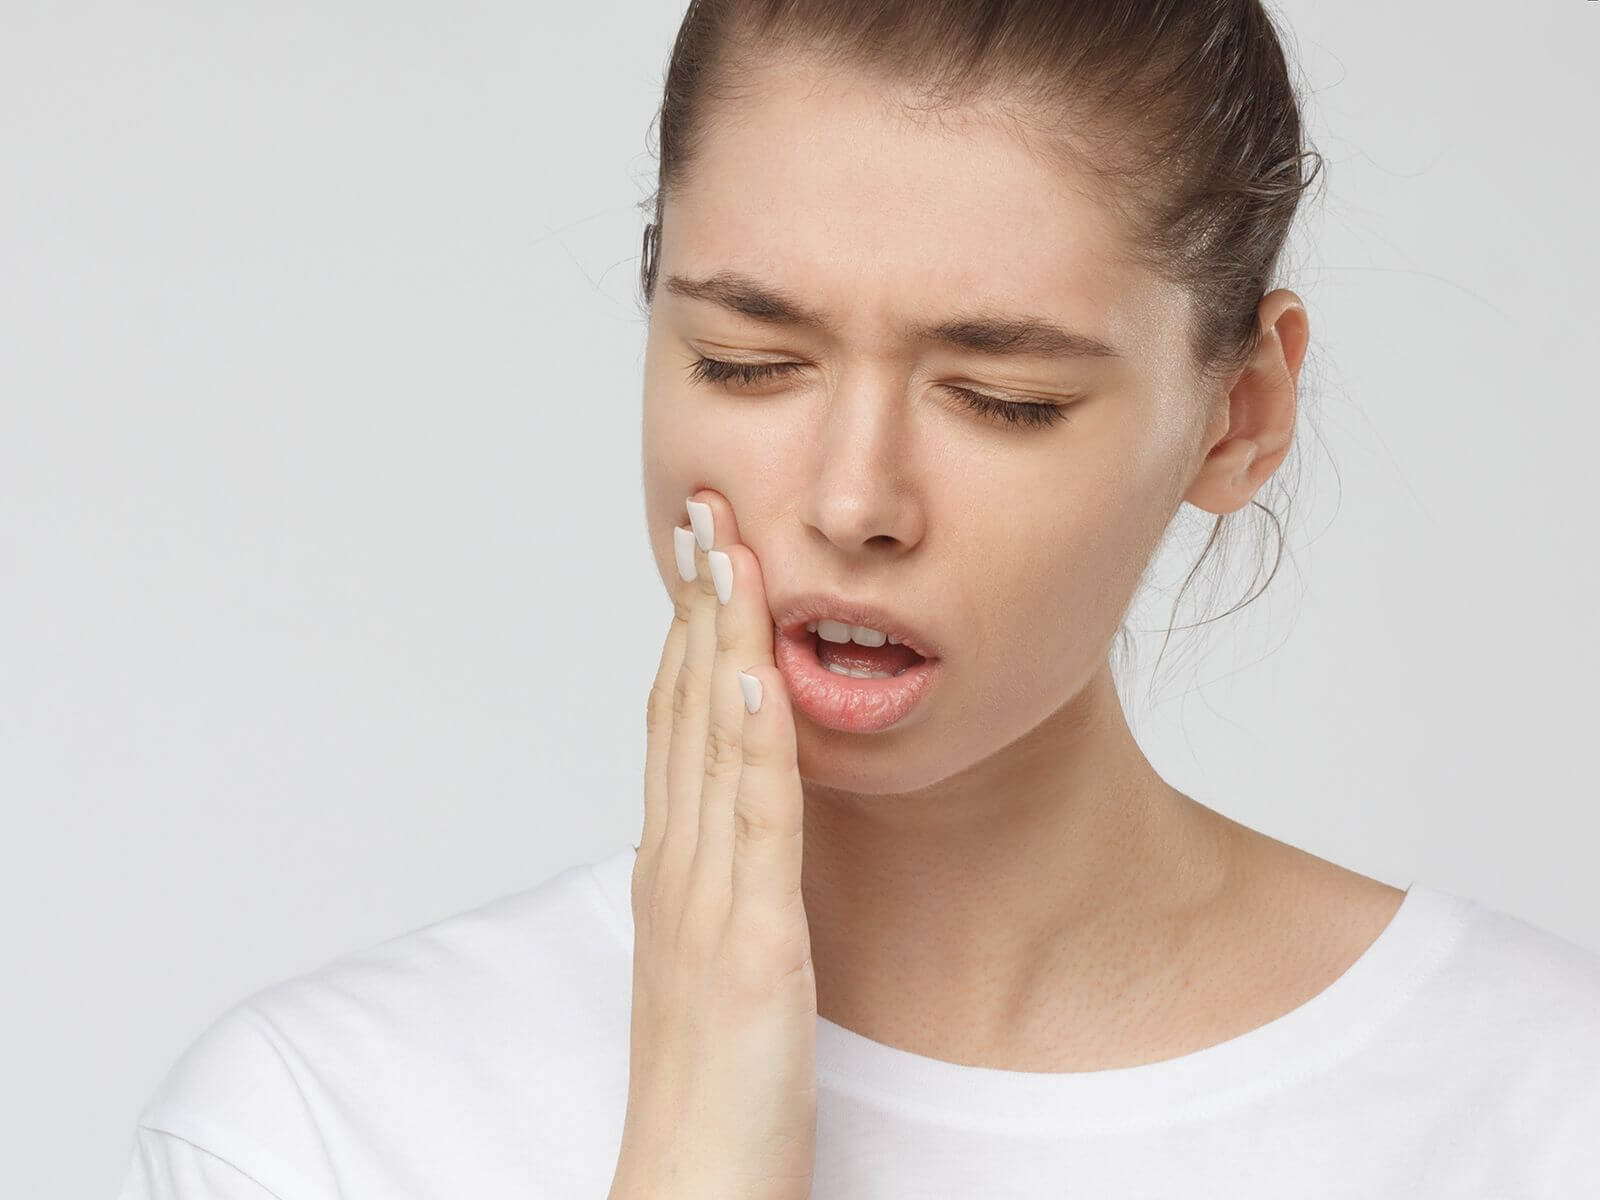 What can happen if a tooth infection is left untreated?